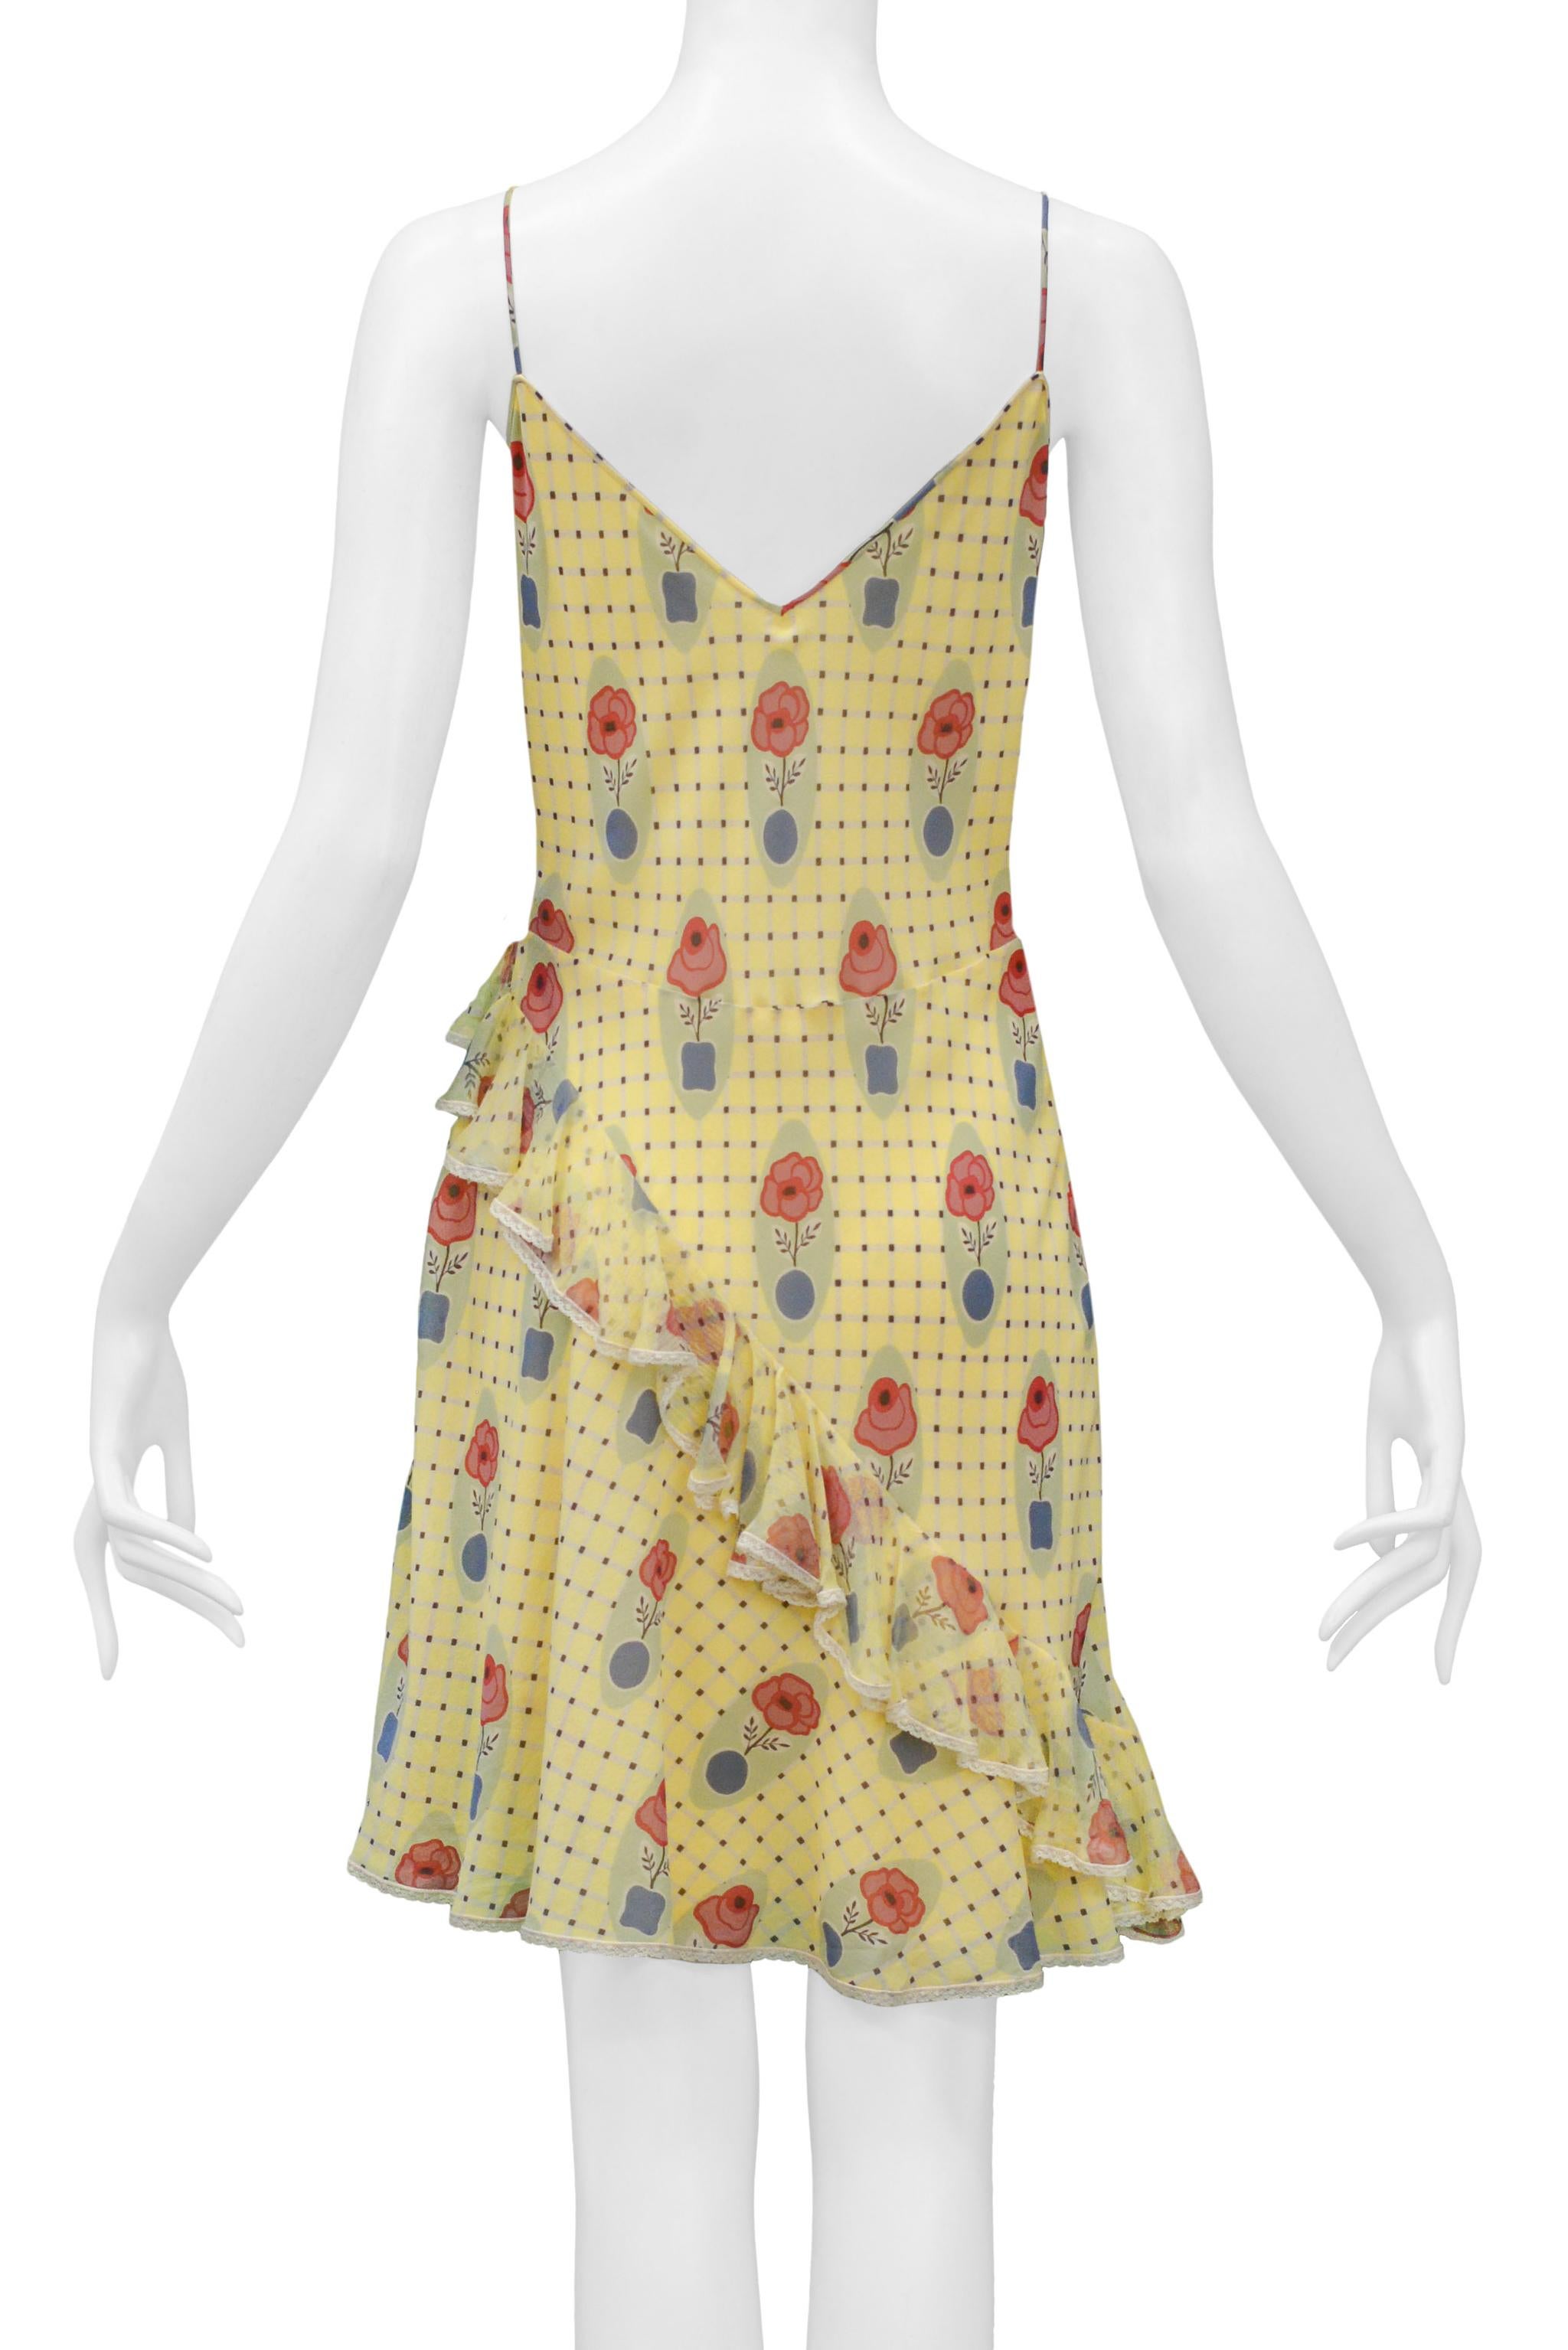 Beige John Galliano Yellow Check Slip Dress With Flower Pot Pattern & White Lace Trim For Sale